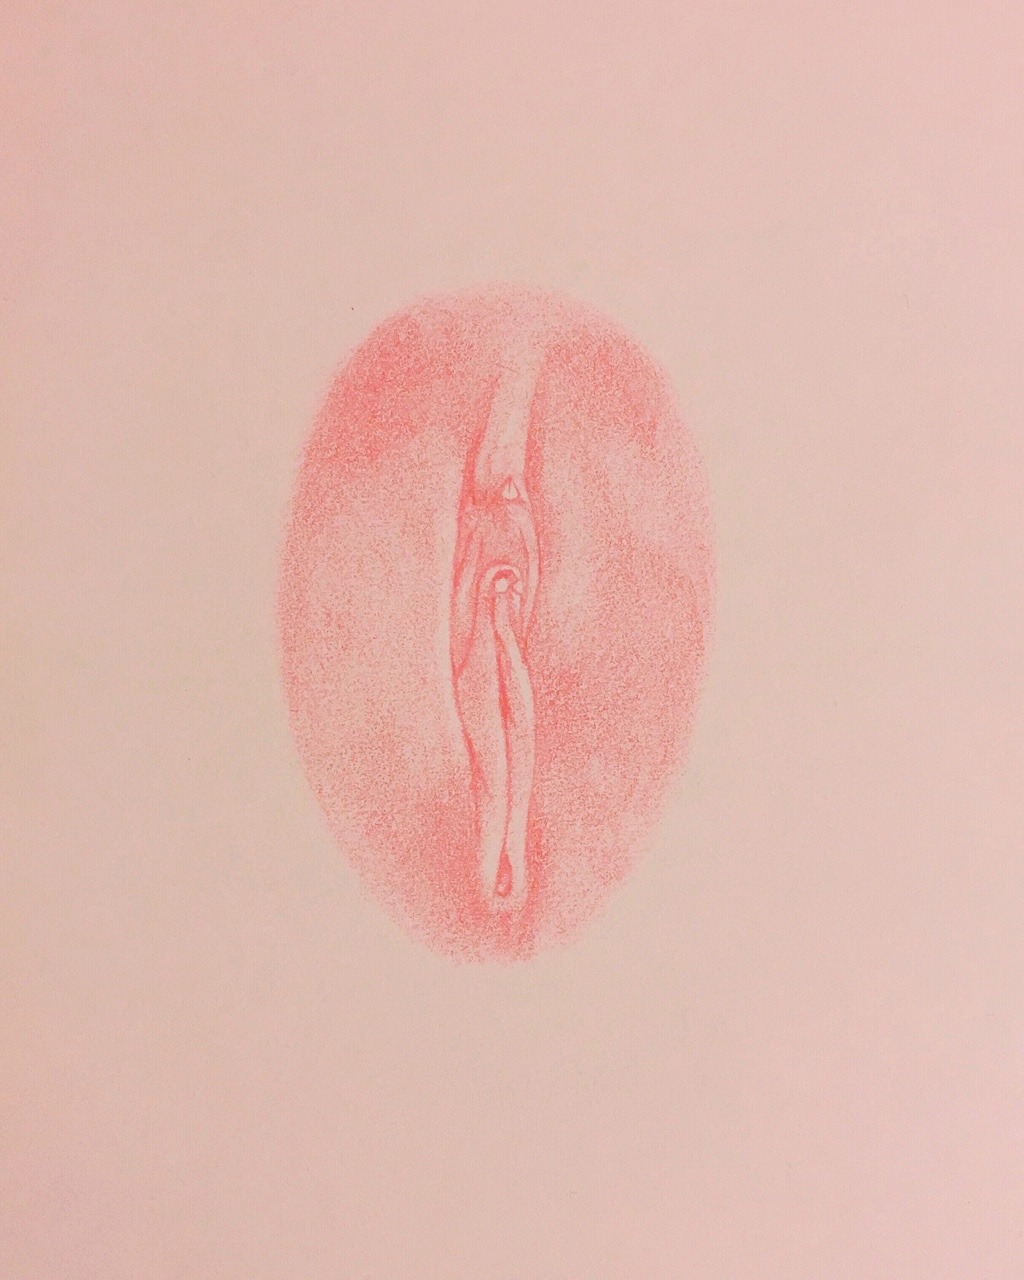 ismaelguerrier:  “Soft Pink 12″ From my new series Soft Pink. (Color pencil on